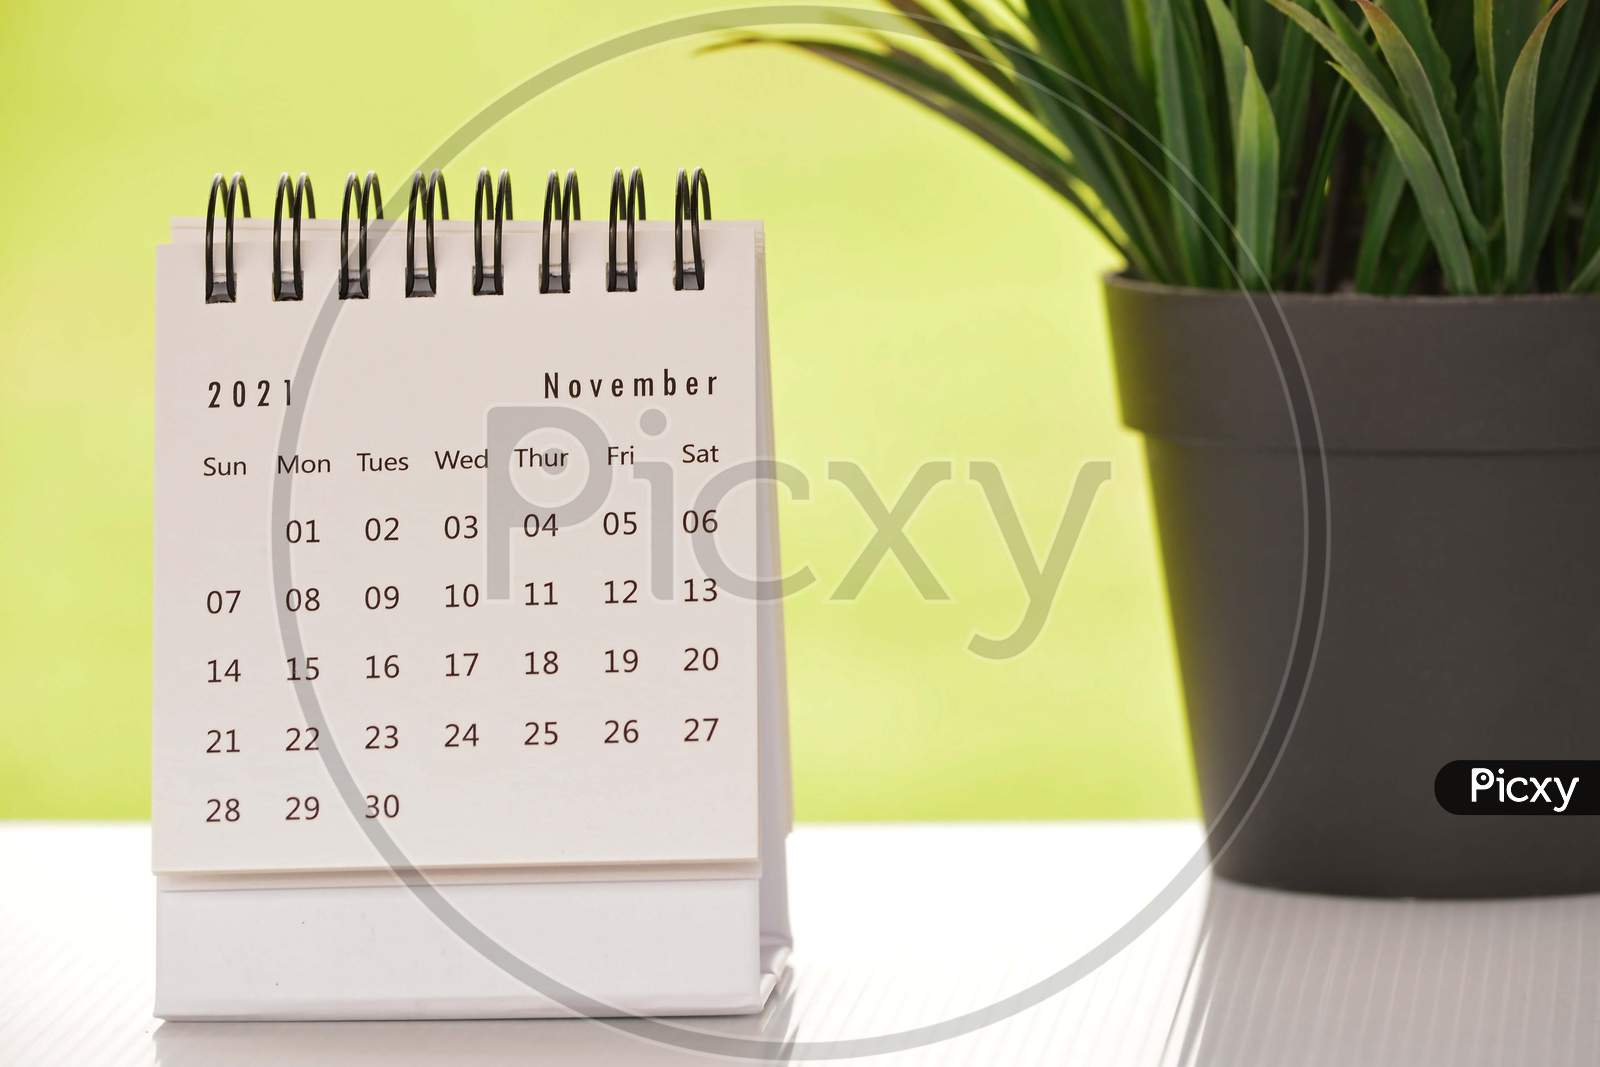 White November 2021 Calendar With Green Backgrounds And Potted Plant. 2021 New Year Concept